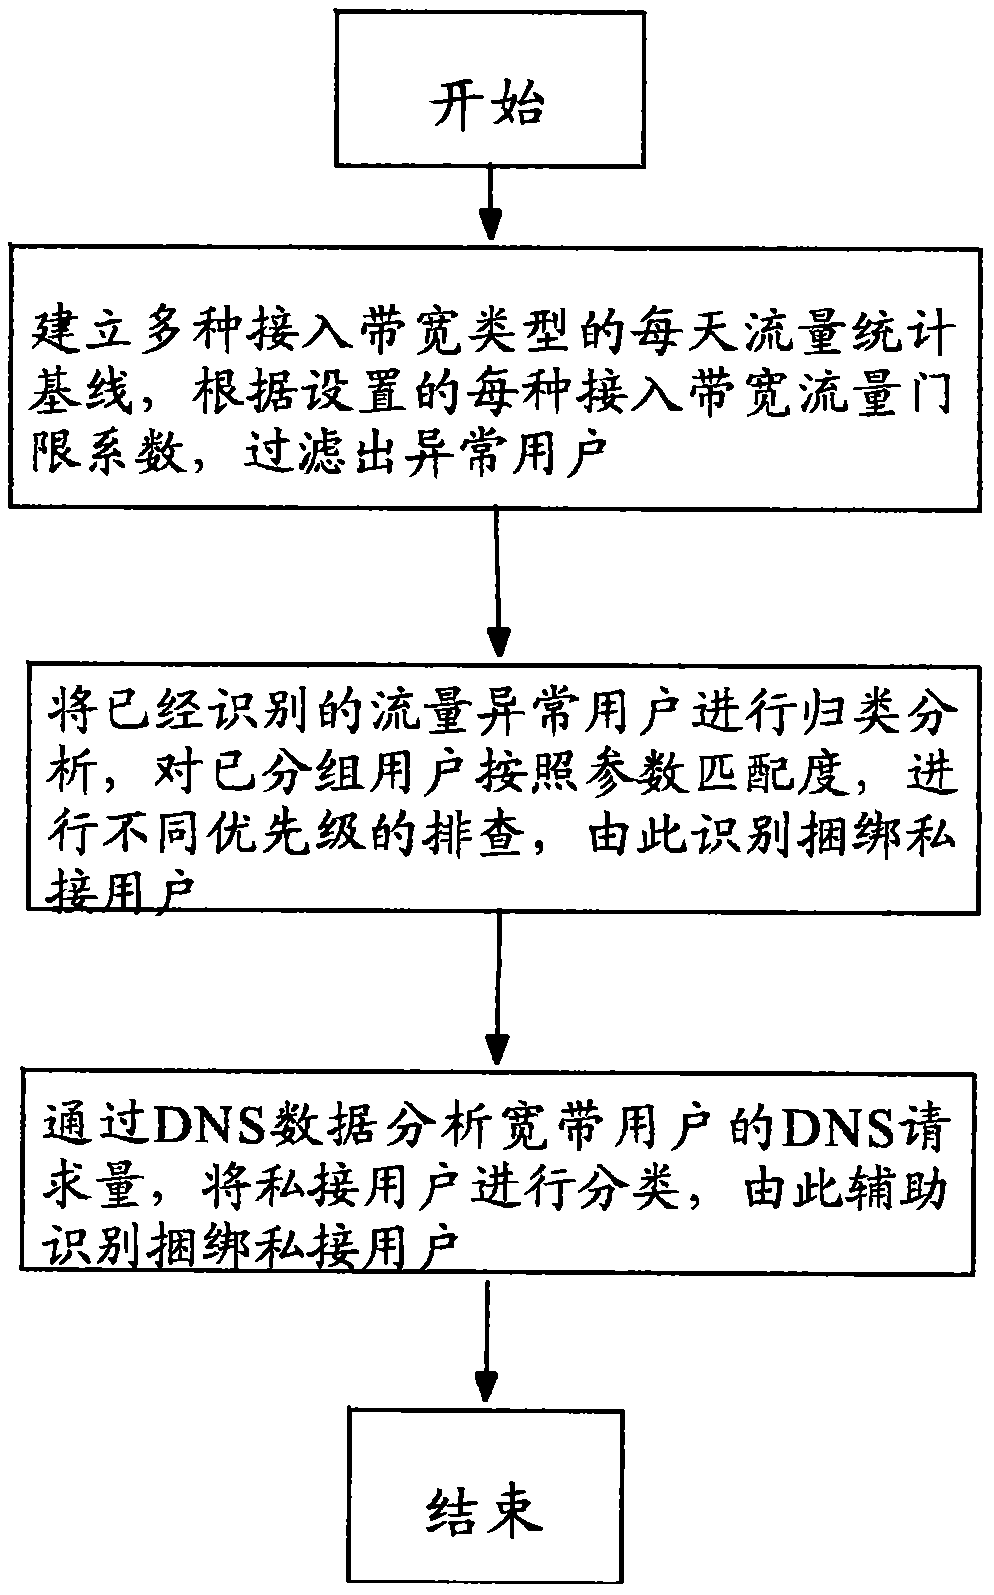 Method for broadband private connection analysis and identification